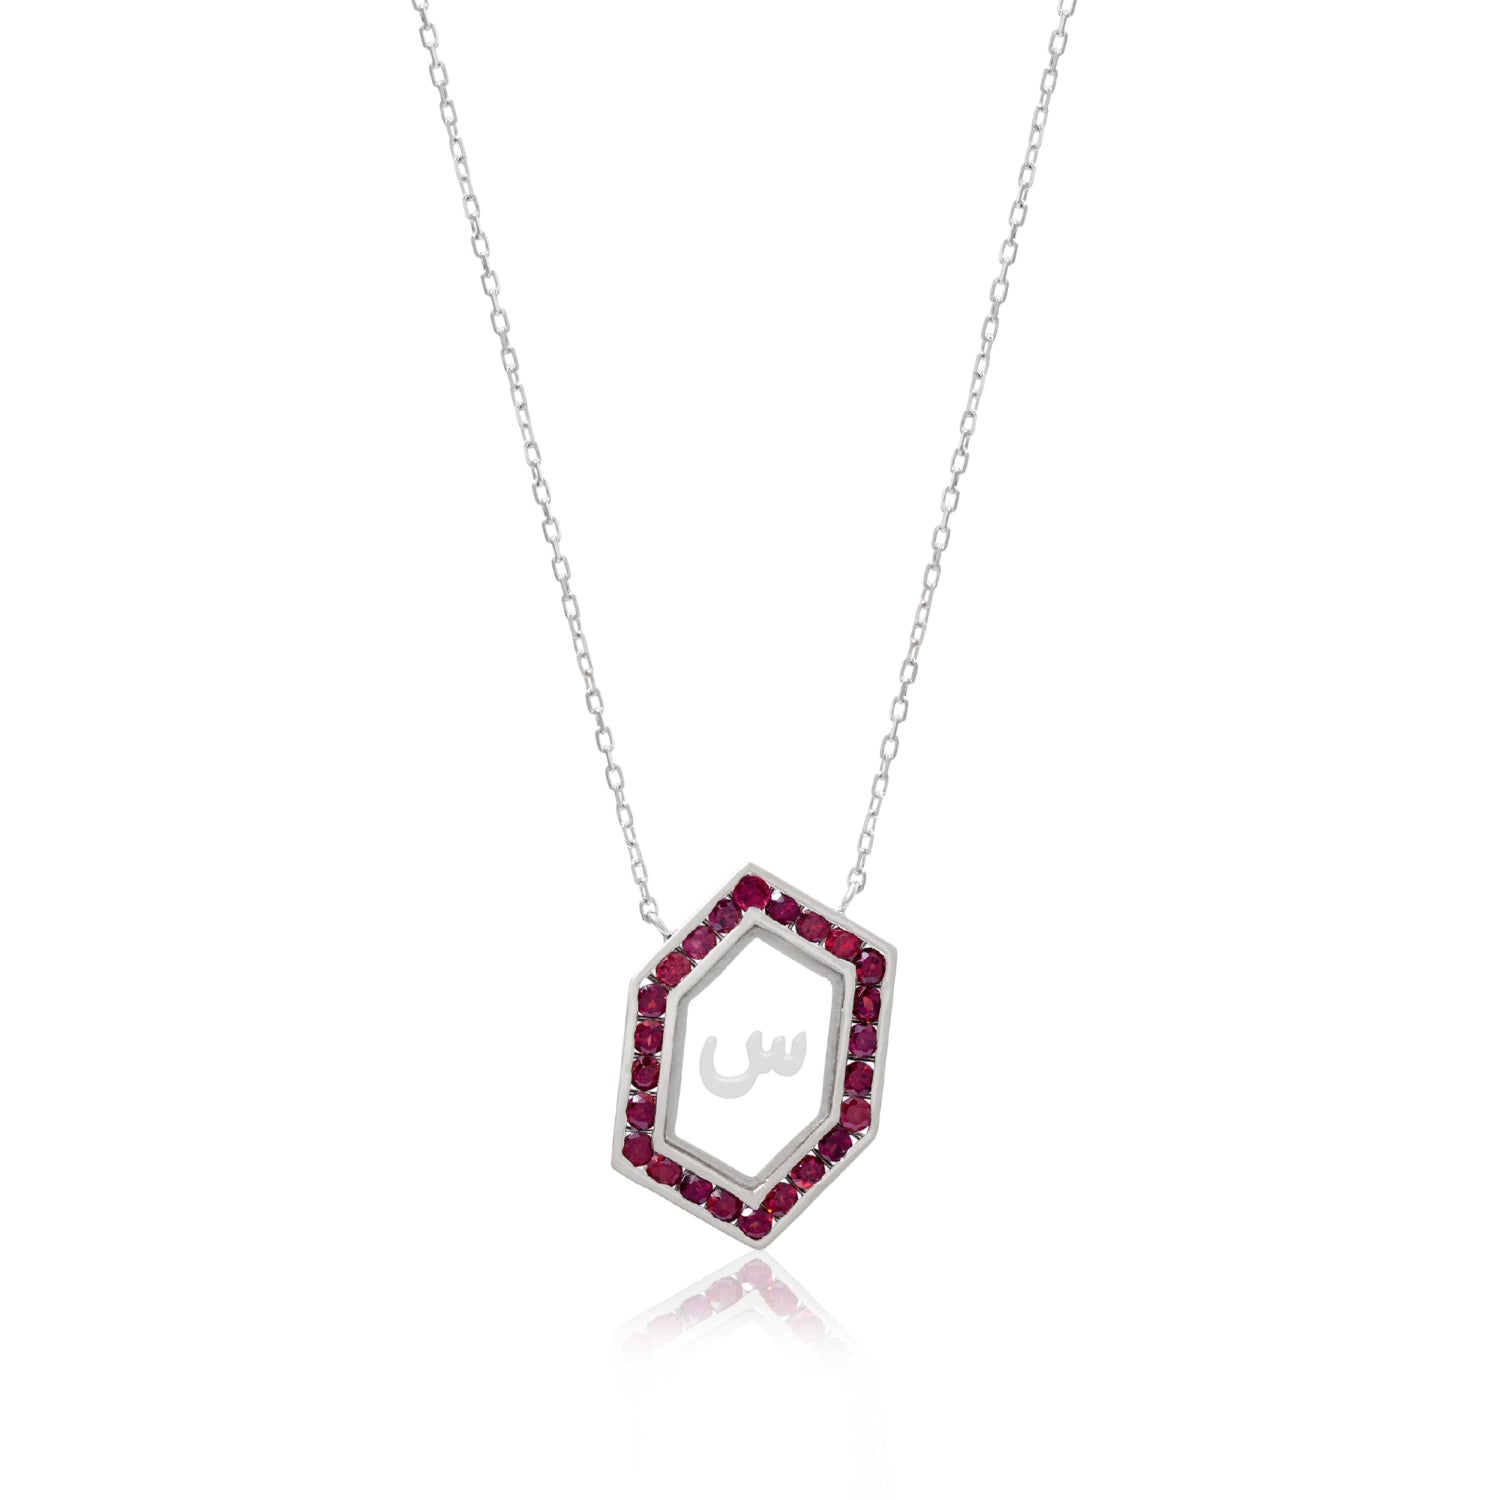 Qamoos 1.0 Letter س Ruby Necklace in White Gold